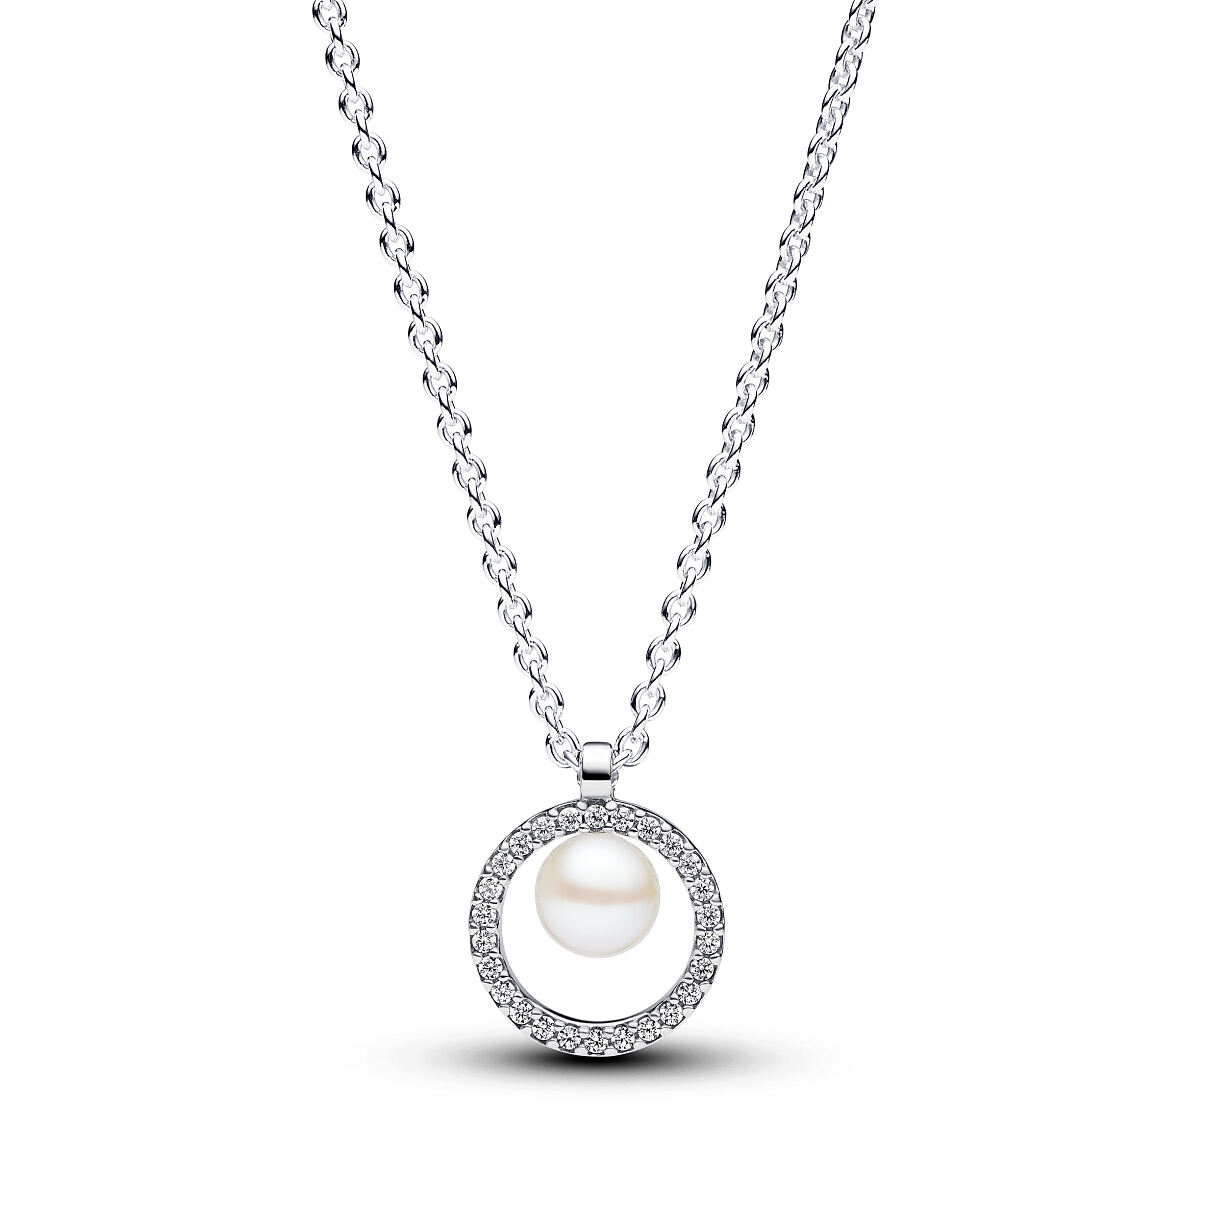 Pandora_Necklace_Sterling Silver_Freshwater Pearls_Cubic Zirconia_393165C01_99,00 Euro (5)